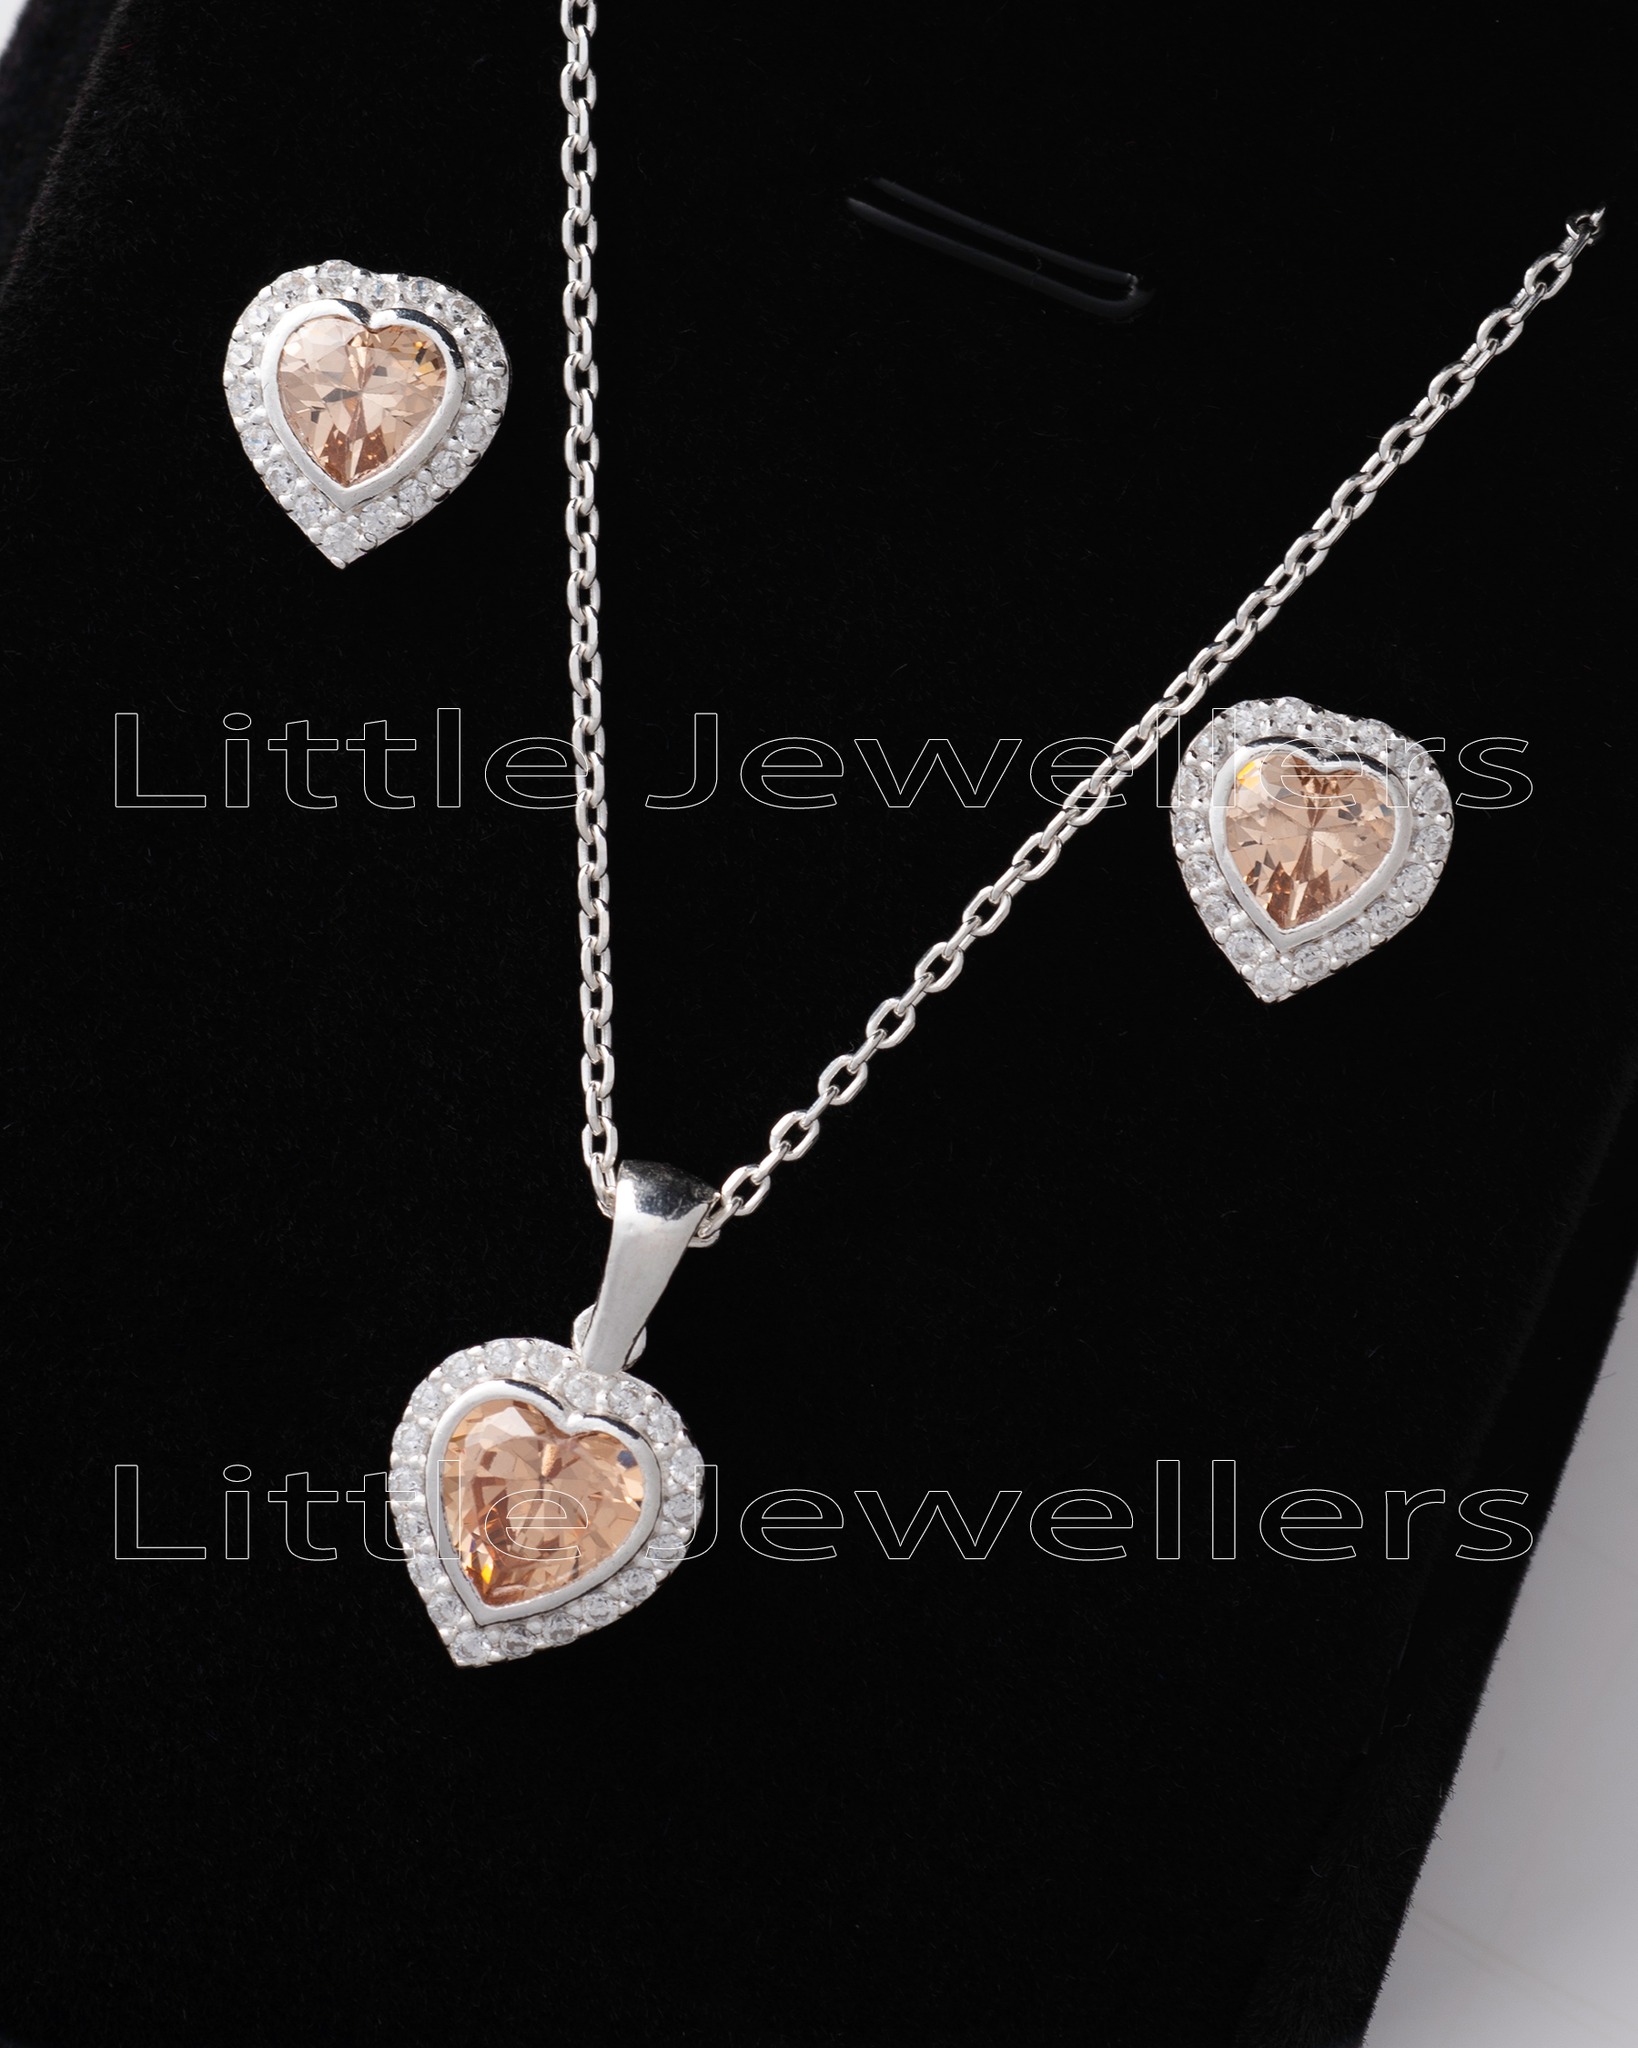 Show your wife your love with this stunning champagne heart shaped silver jewelry gift set. Perfect for anniversary gifts, this elegant set is the perfect way to let her know how much you care.